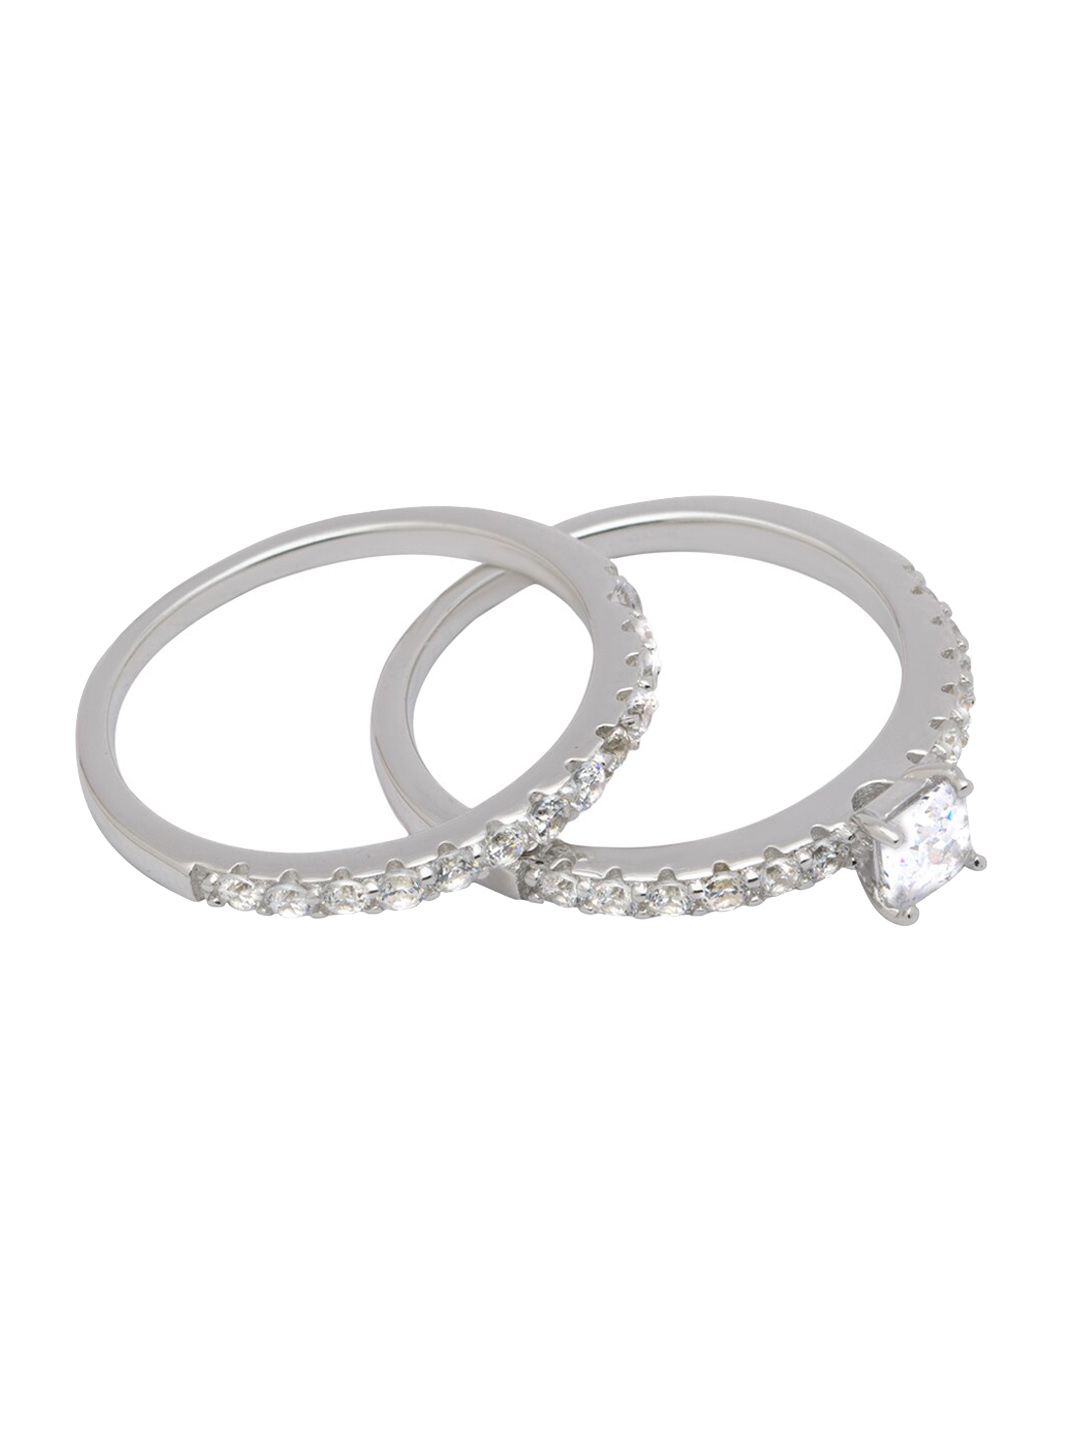 ANAYRA Women Set of 2 925 Sterling Silver Finger Rings Price in India